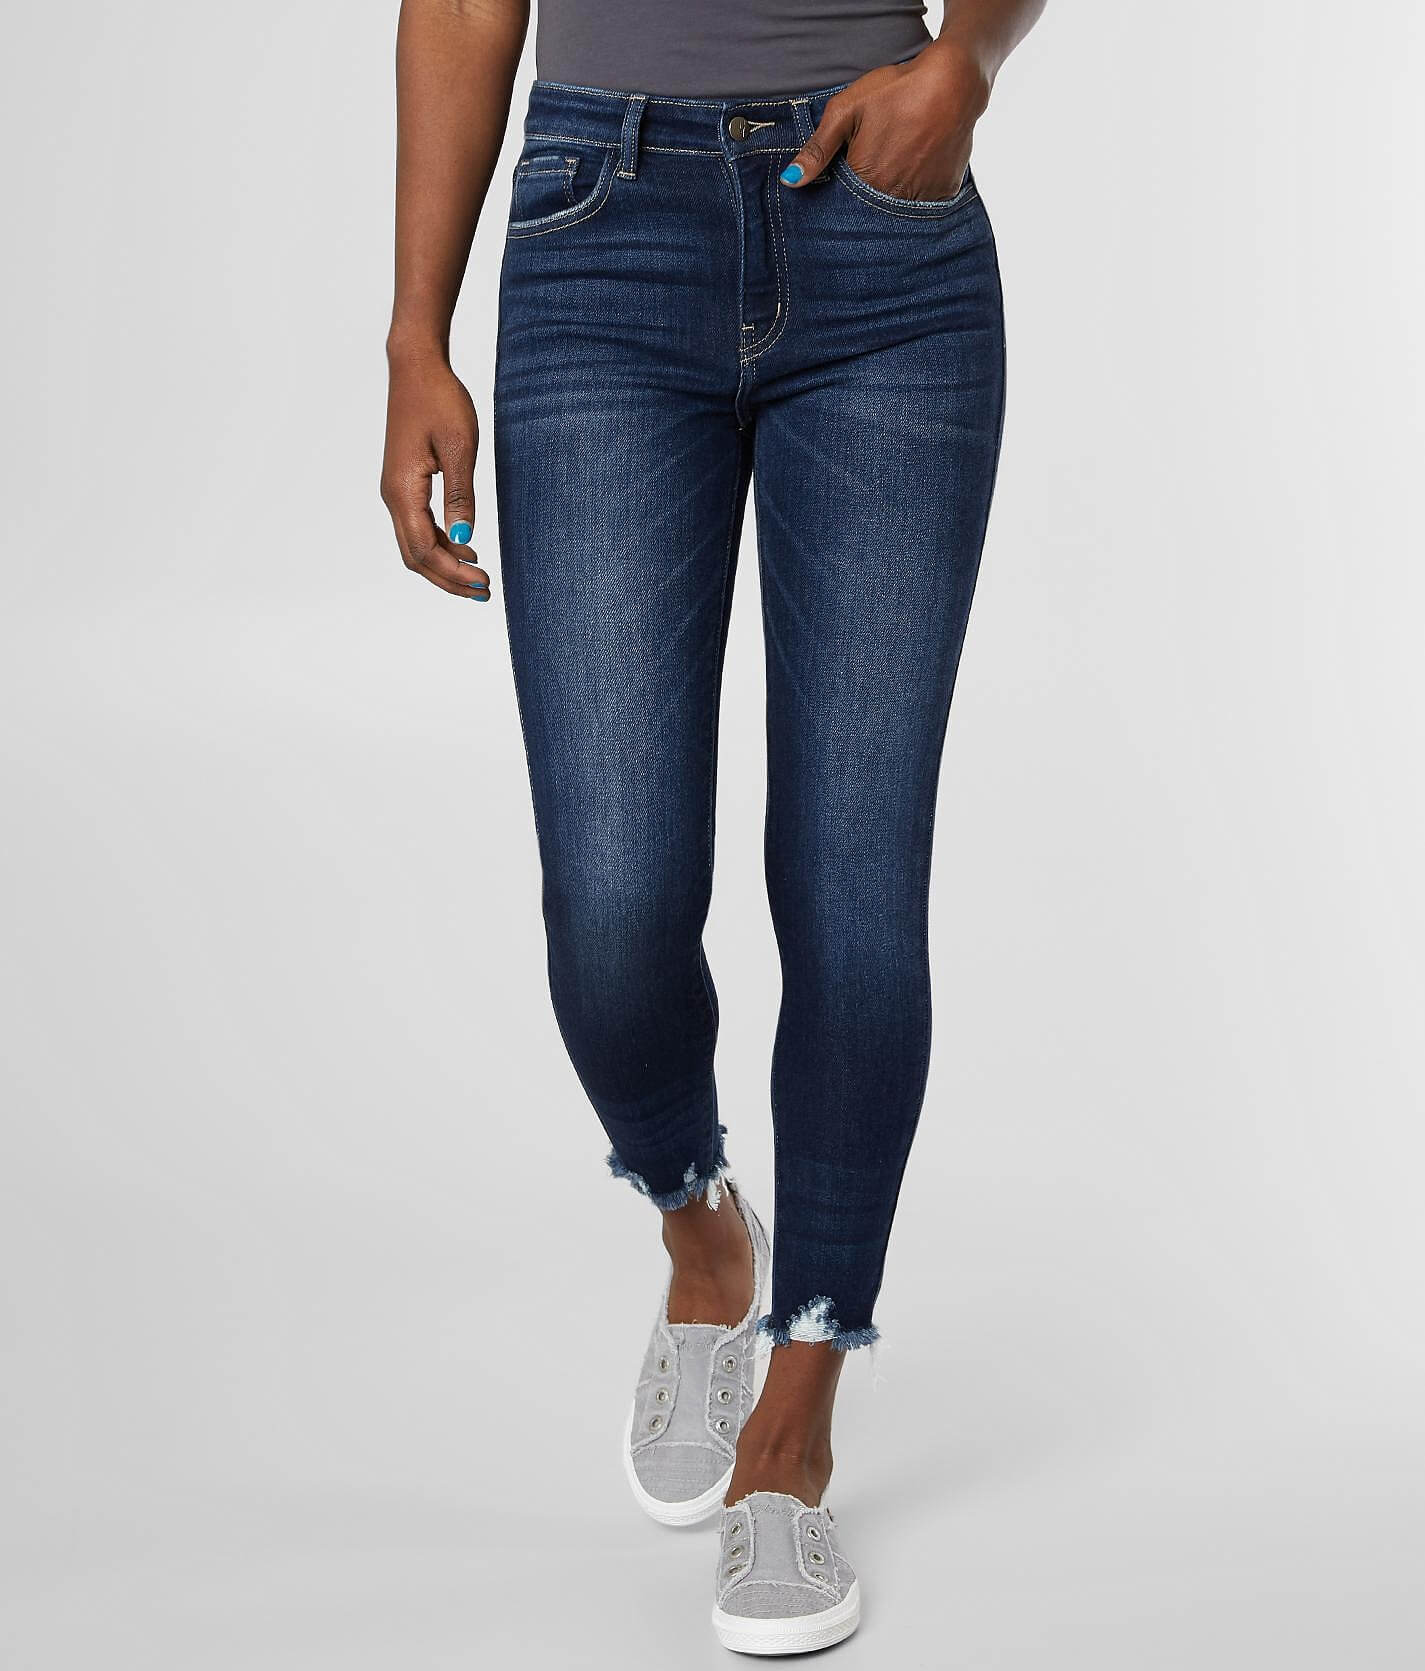 above ankle jeans